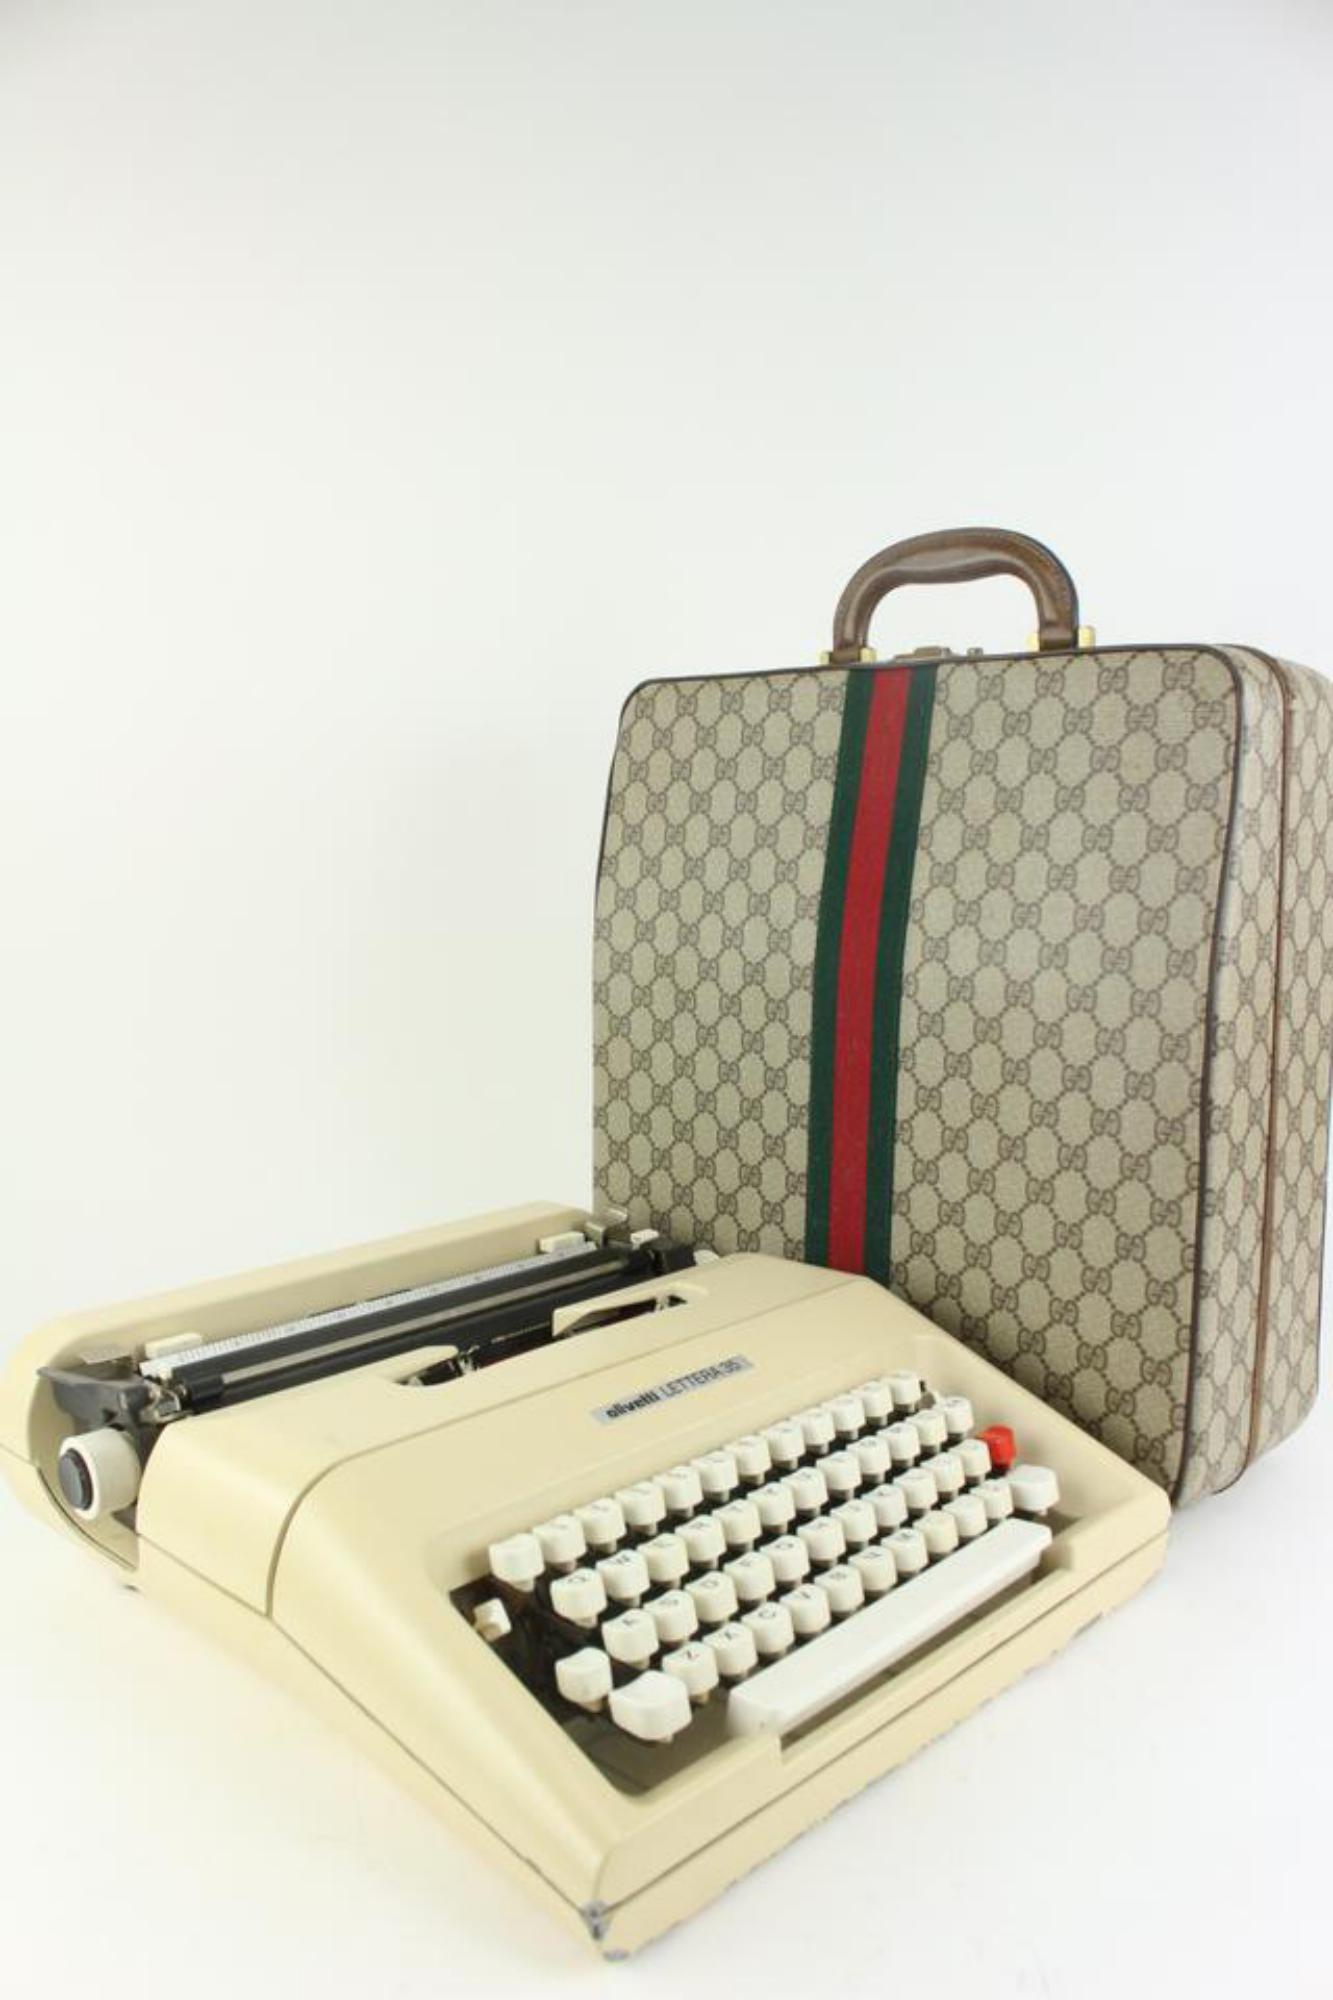 Gucci Supreme Web Typerwriter Carrying Case Olivetti Lettera 35 1217g22
Made In: Italy
Measurements: Length:  14